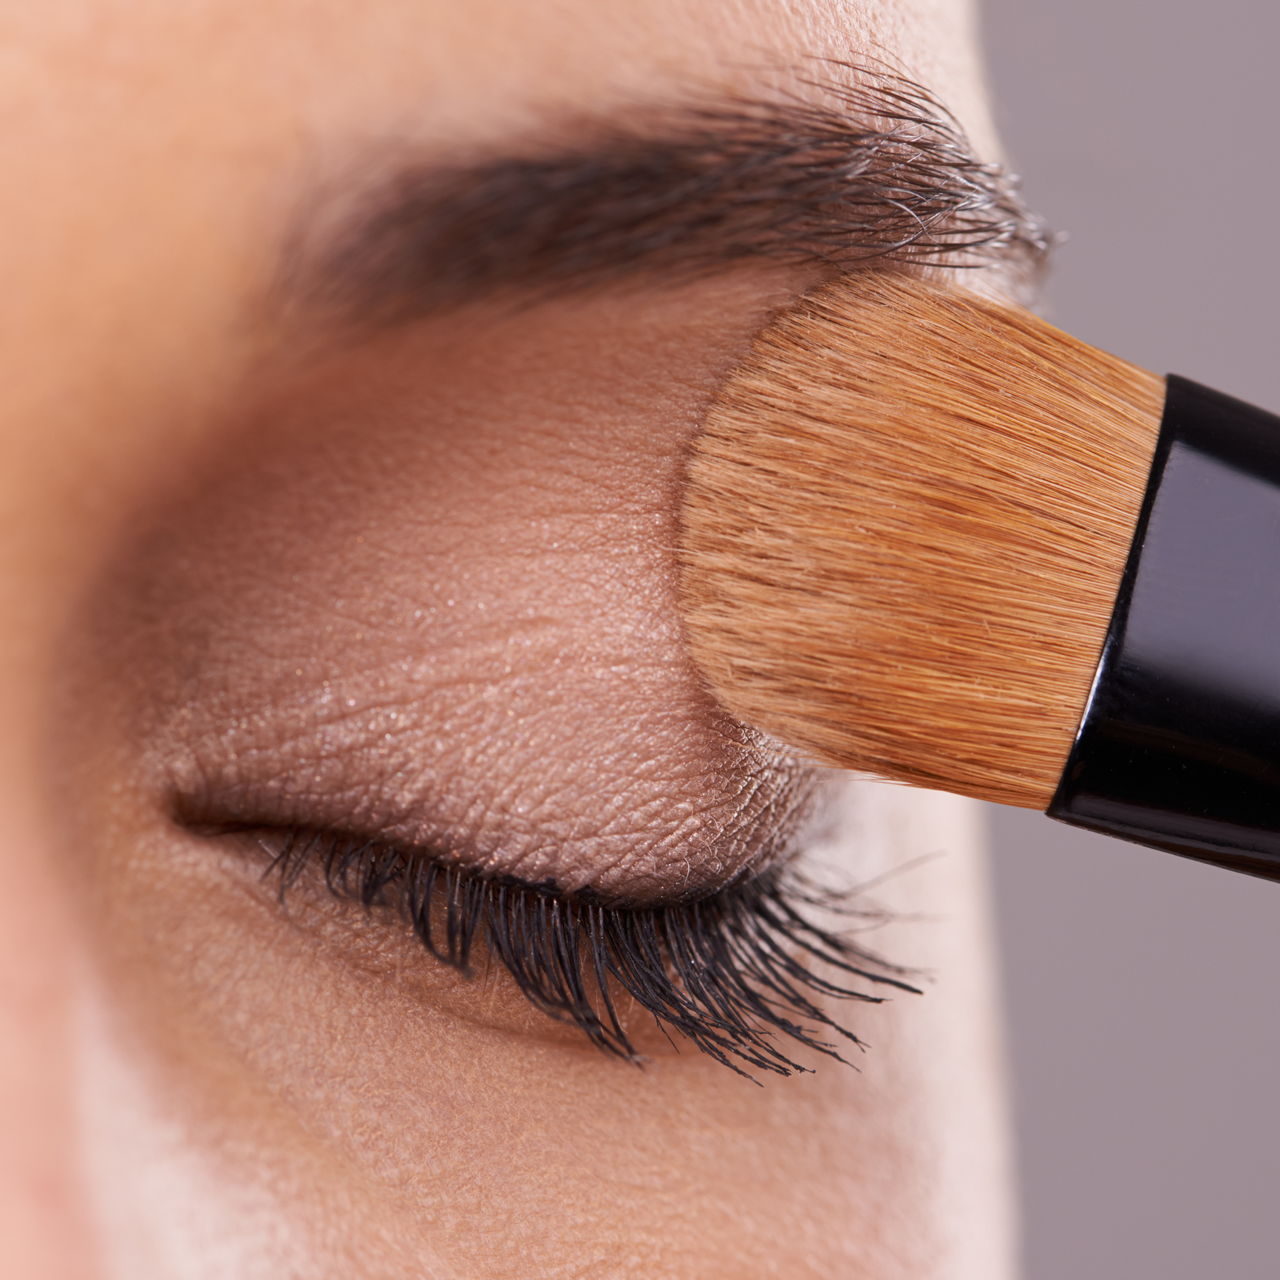  makeup tips to make eyes look less tired 